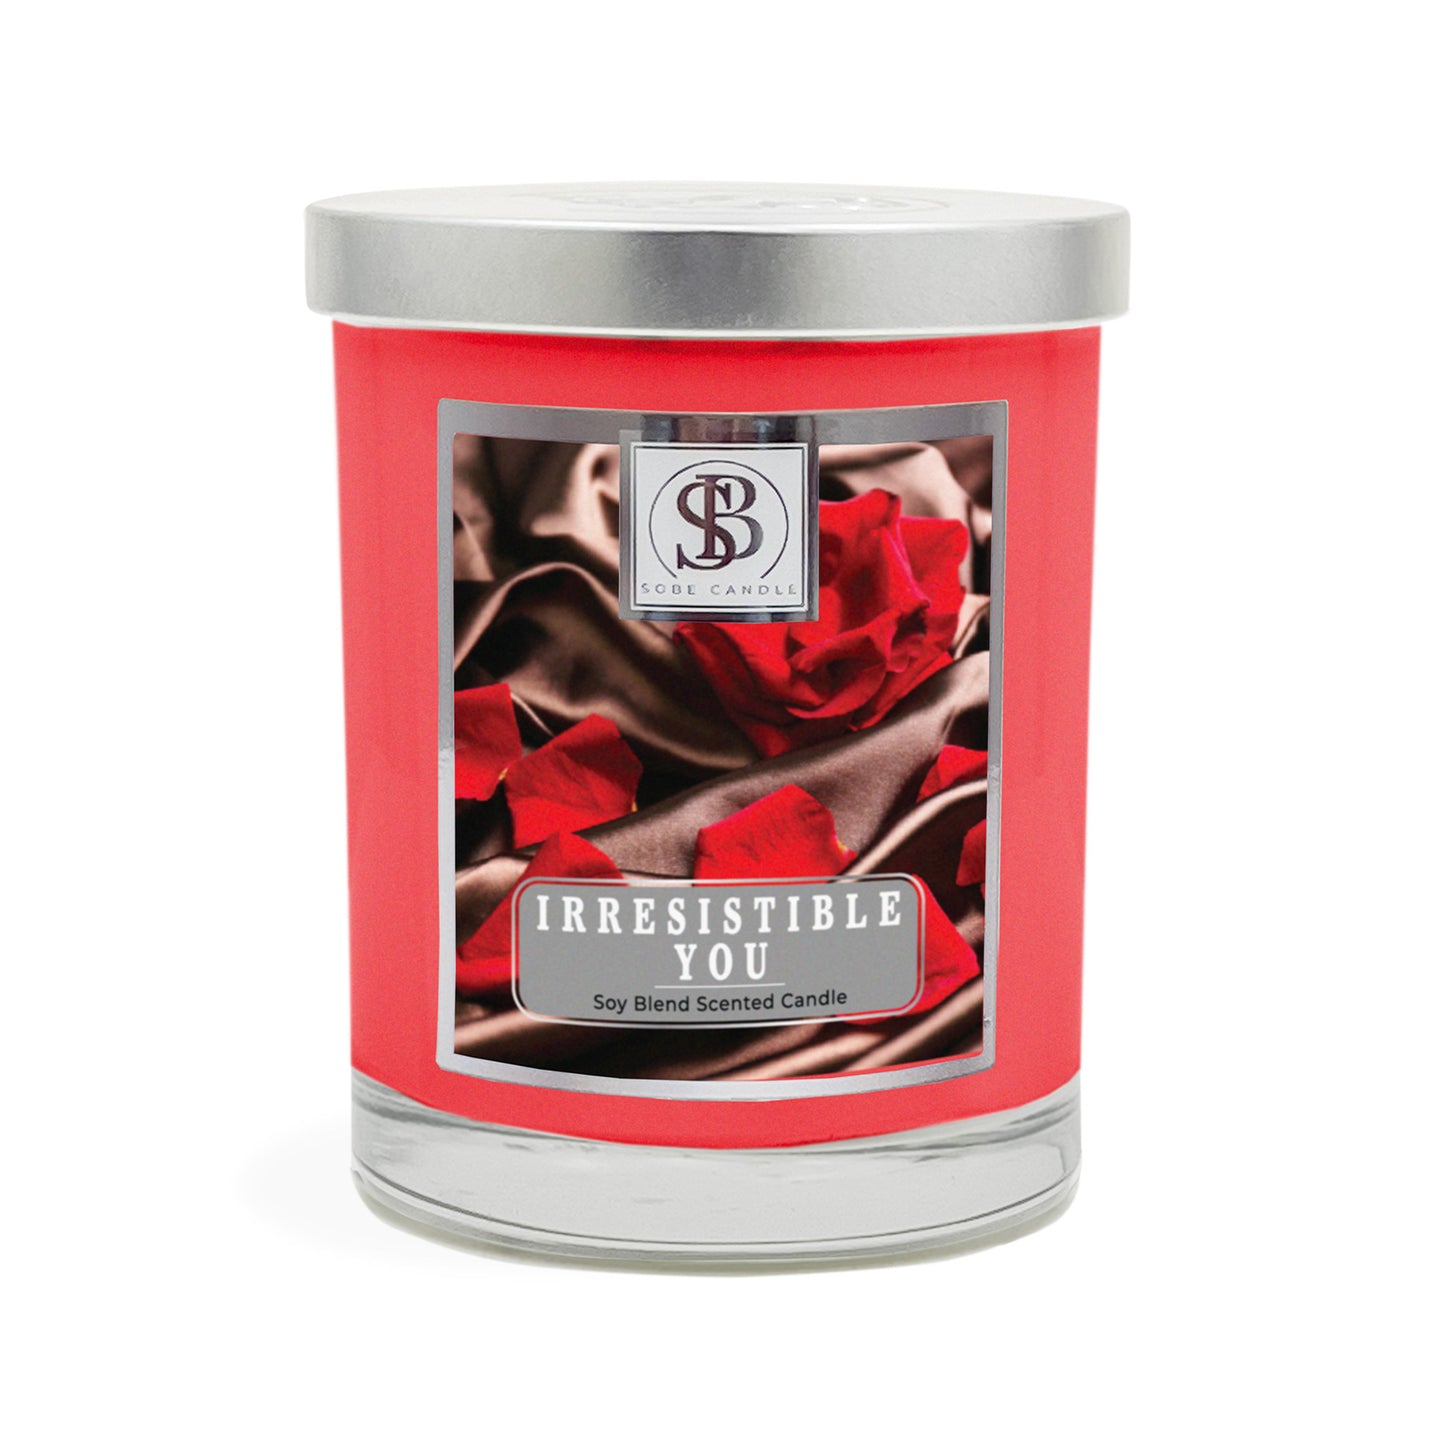 IRRESISTIBLE YOU | Soy Scented Candle 11 oz